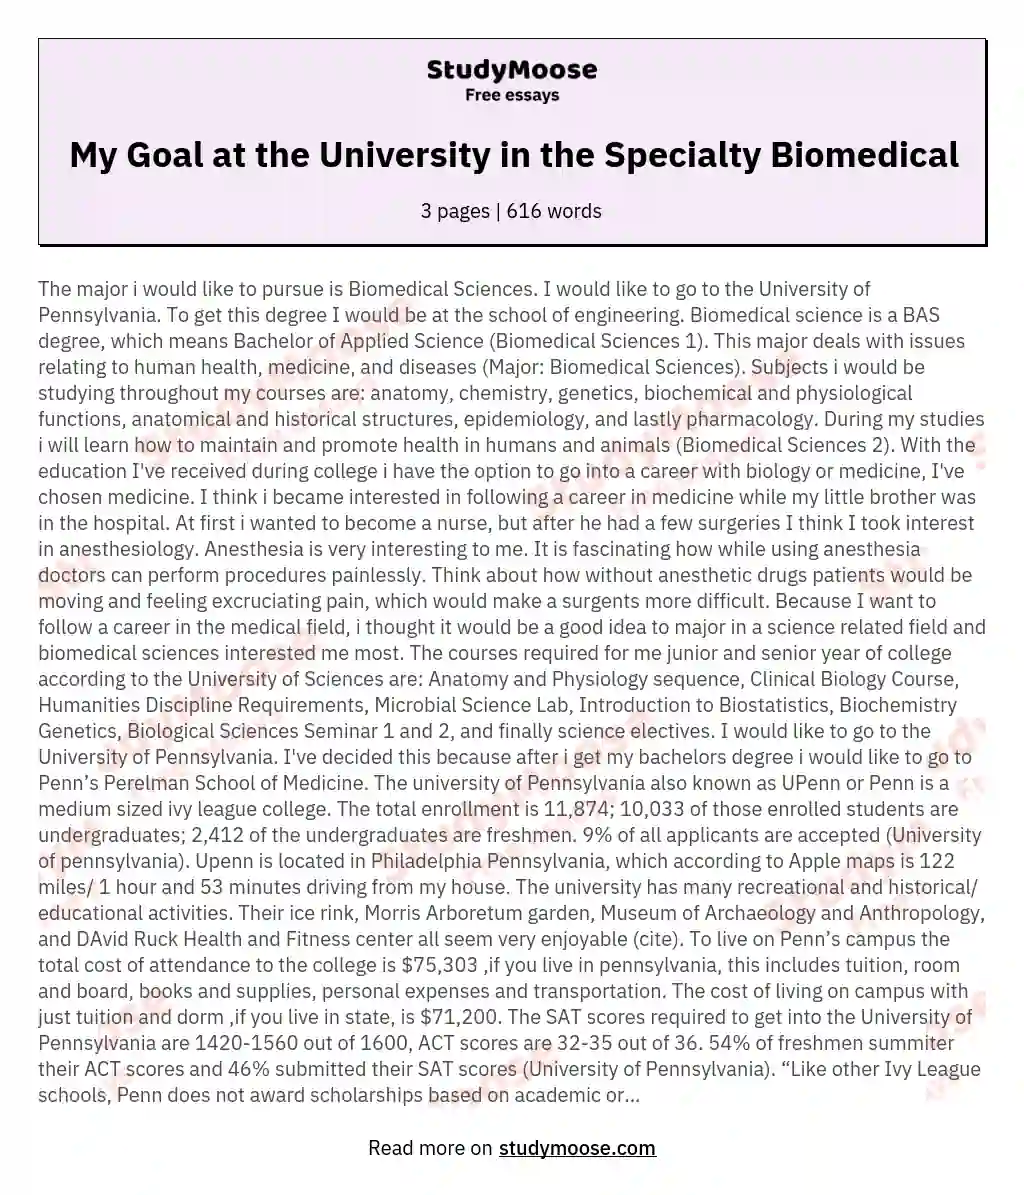 My Goal at the University in the Specialty Biomedical essay